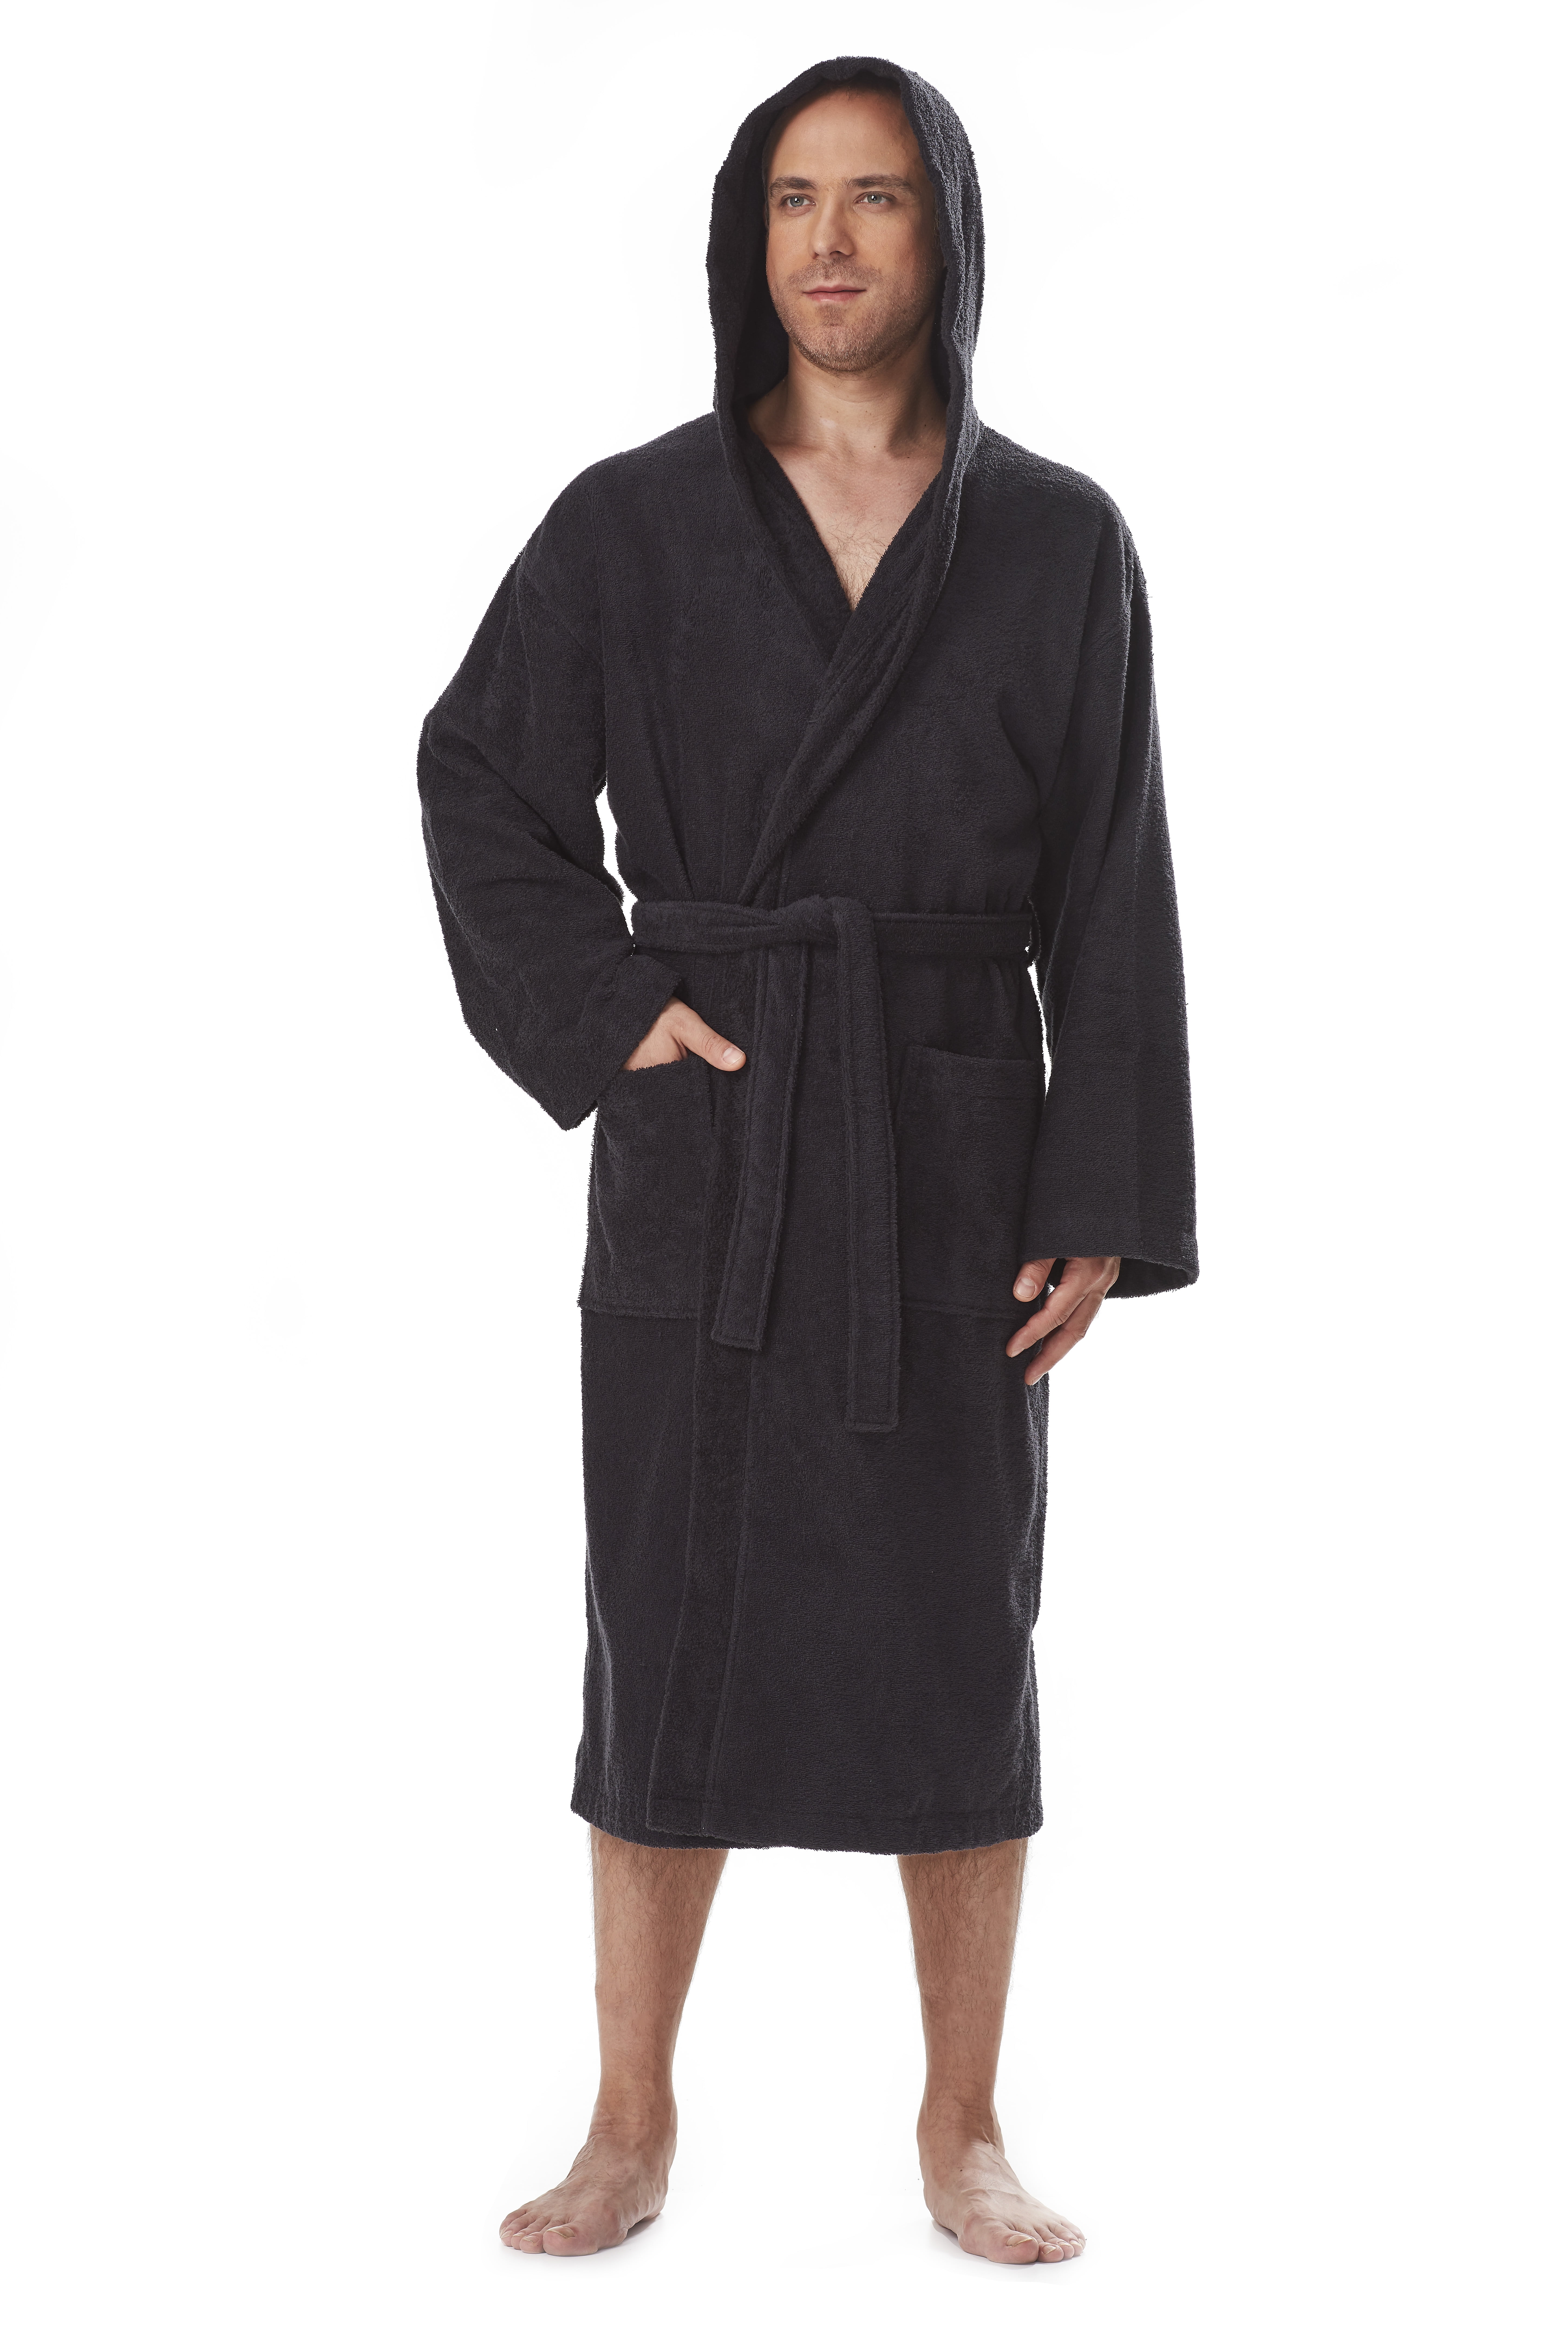 Arus - Men's Olympic Style Turkish Cotton Hooded Bathrobe with Long ...